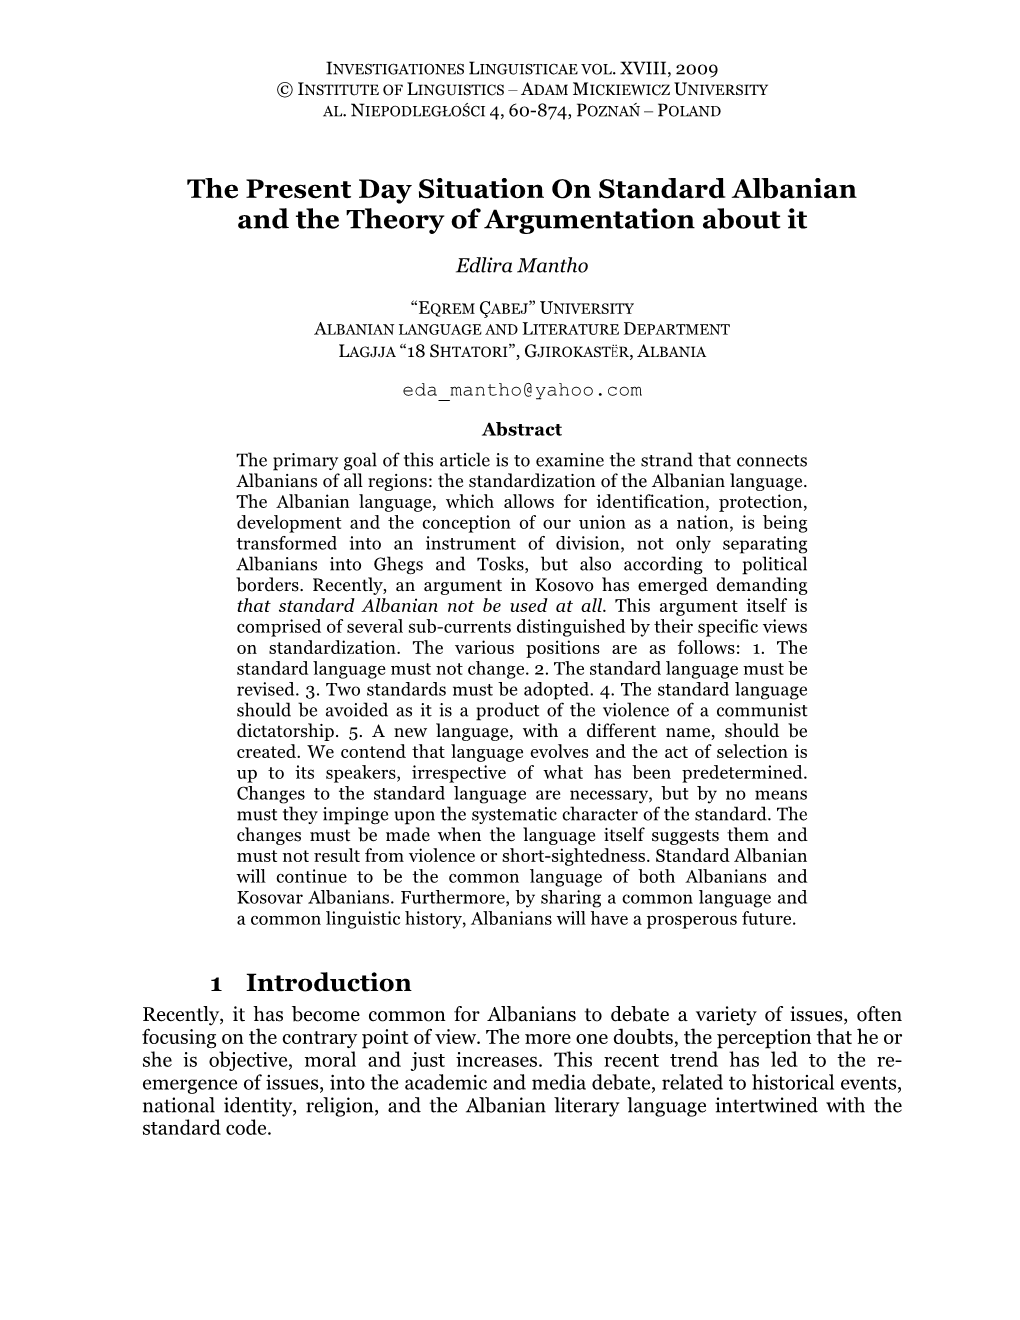 The Present Day Situation on Standard Albanian and the Theory of Argumentation About It